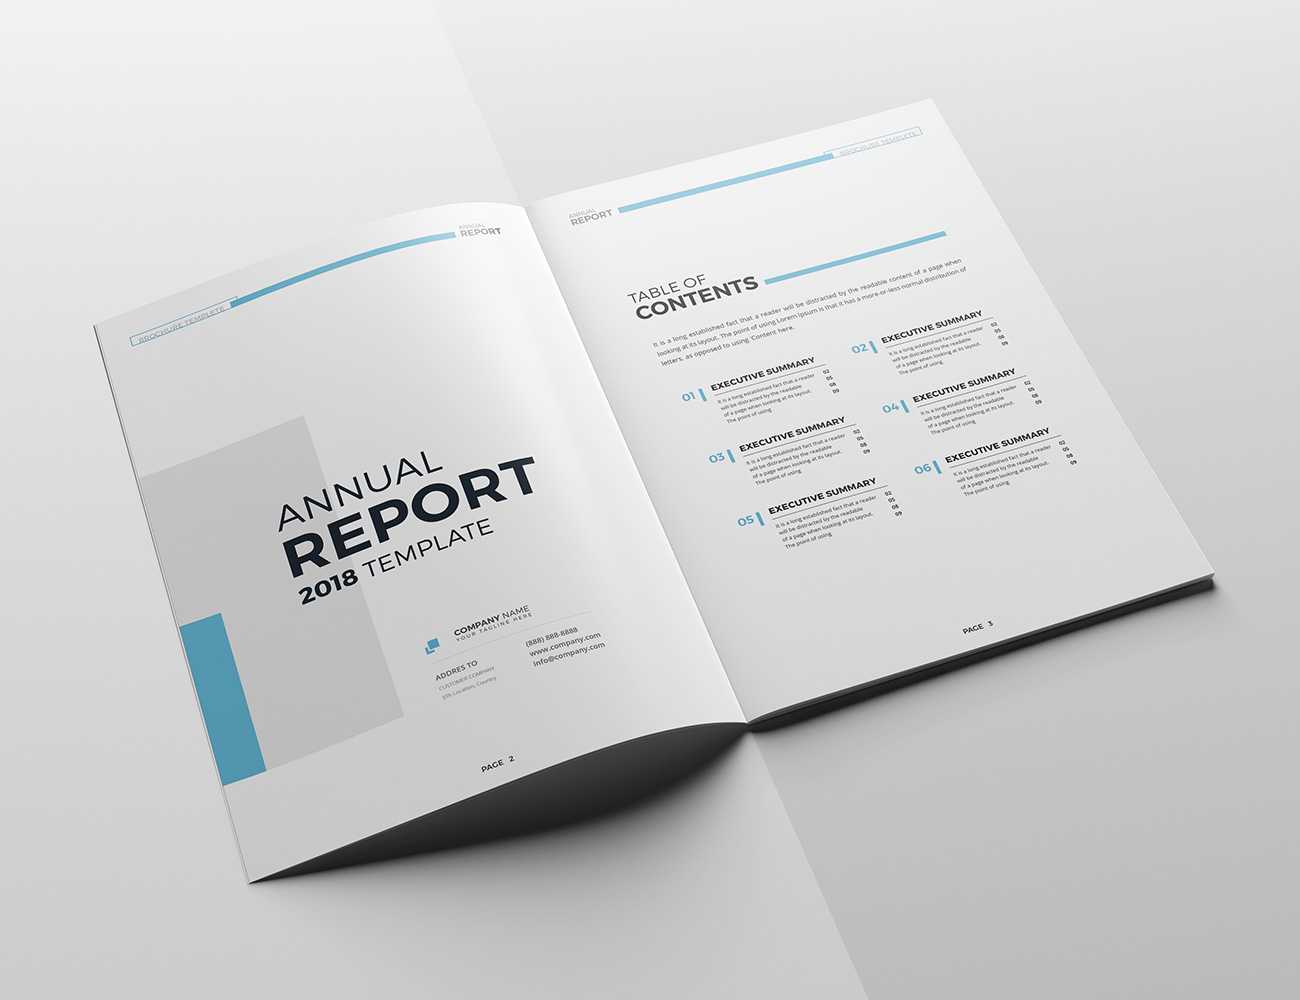 The Blue Annual Report For Summary Annual Report Template